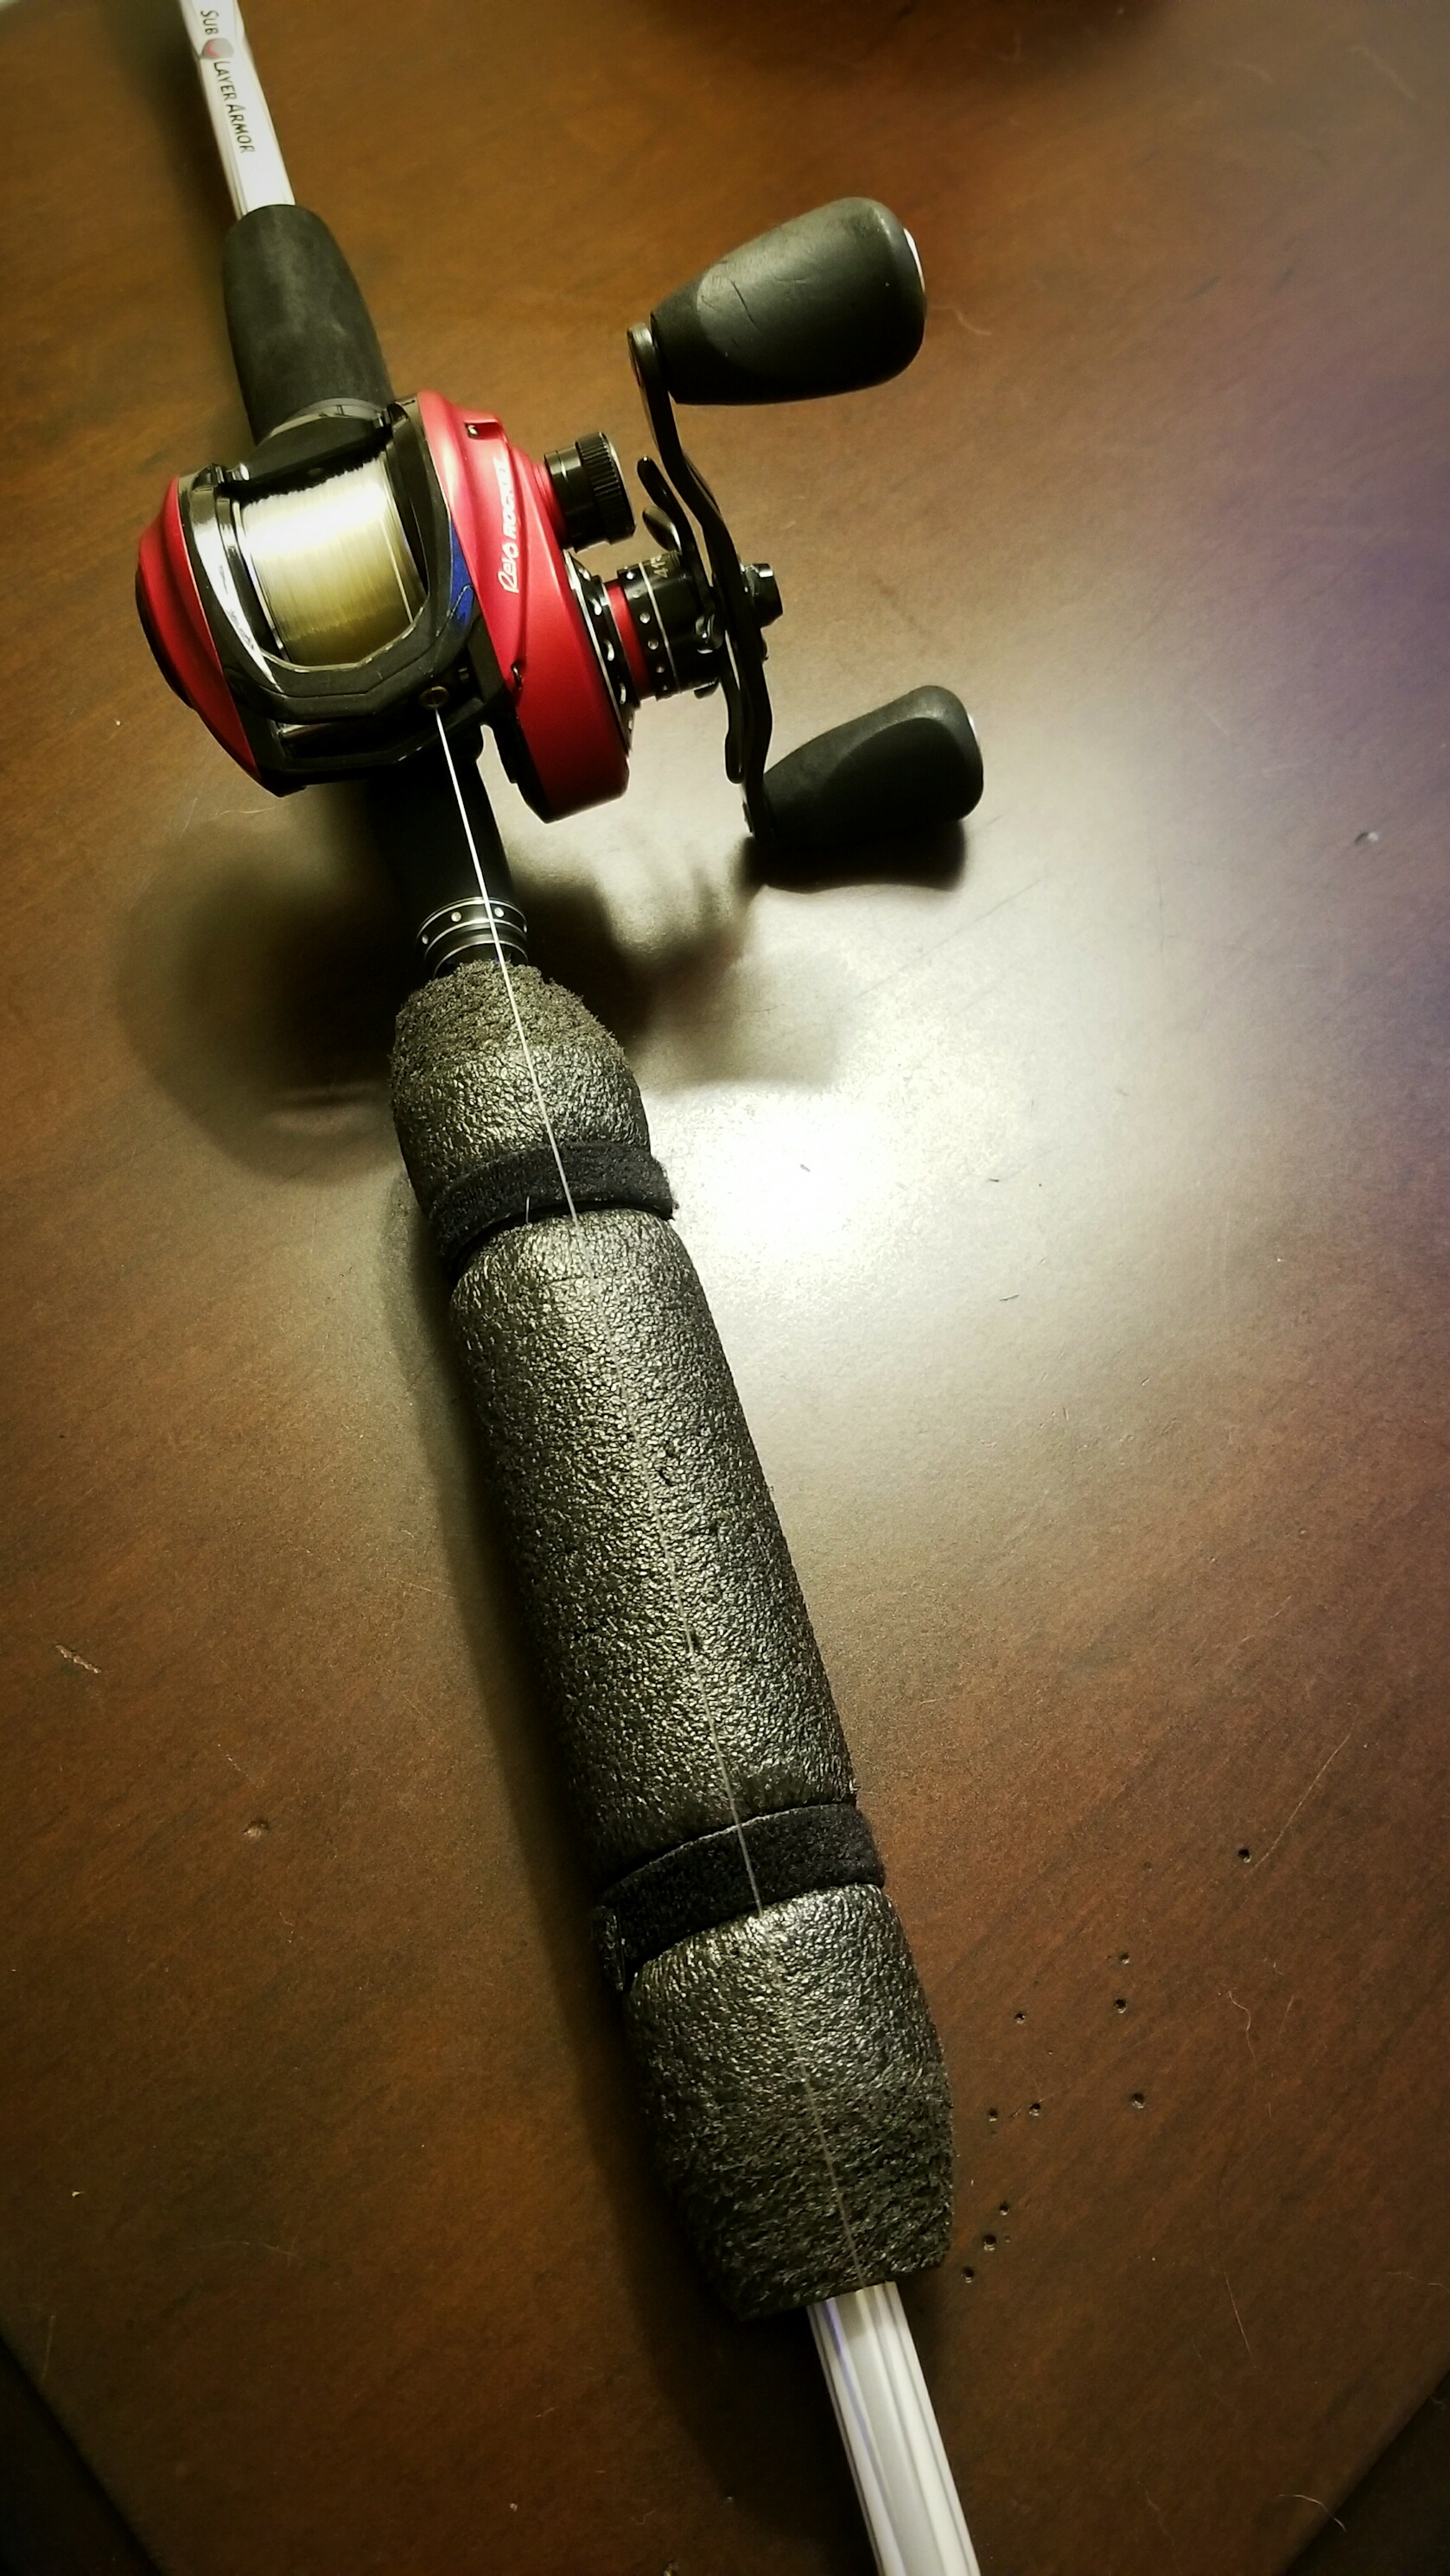 Abu Garcia rod and reel with a black rod float attached to the blank